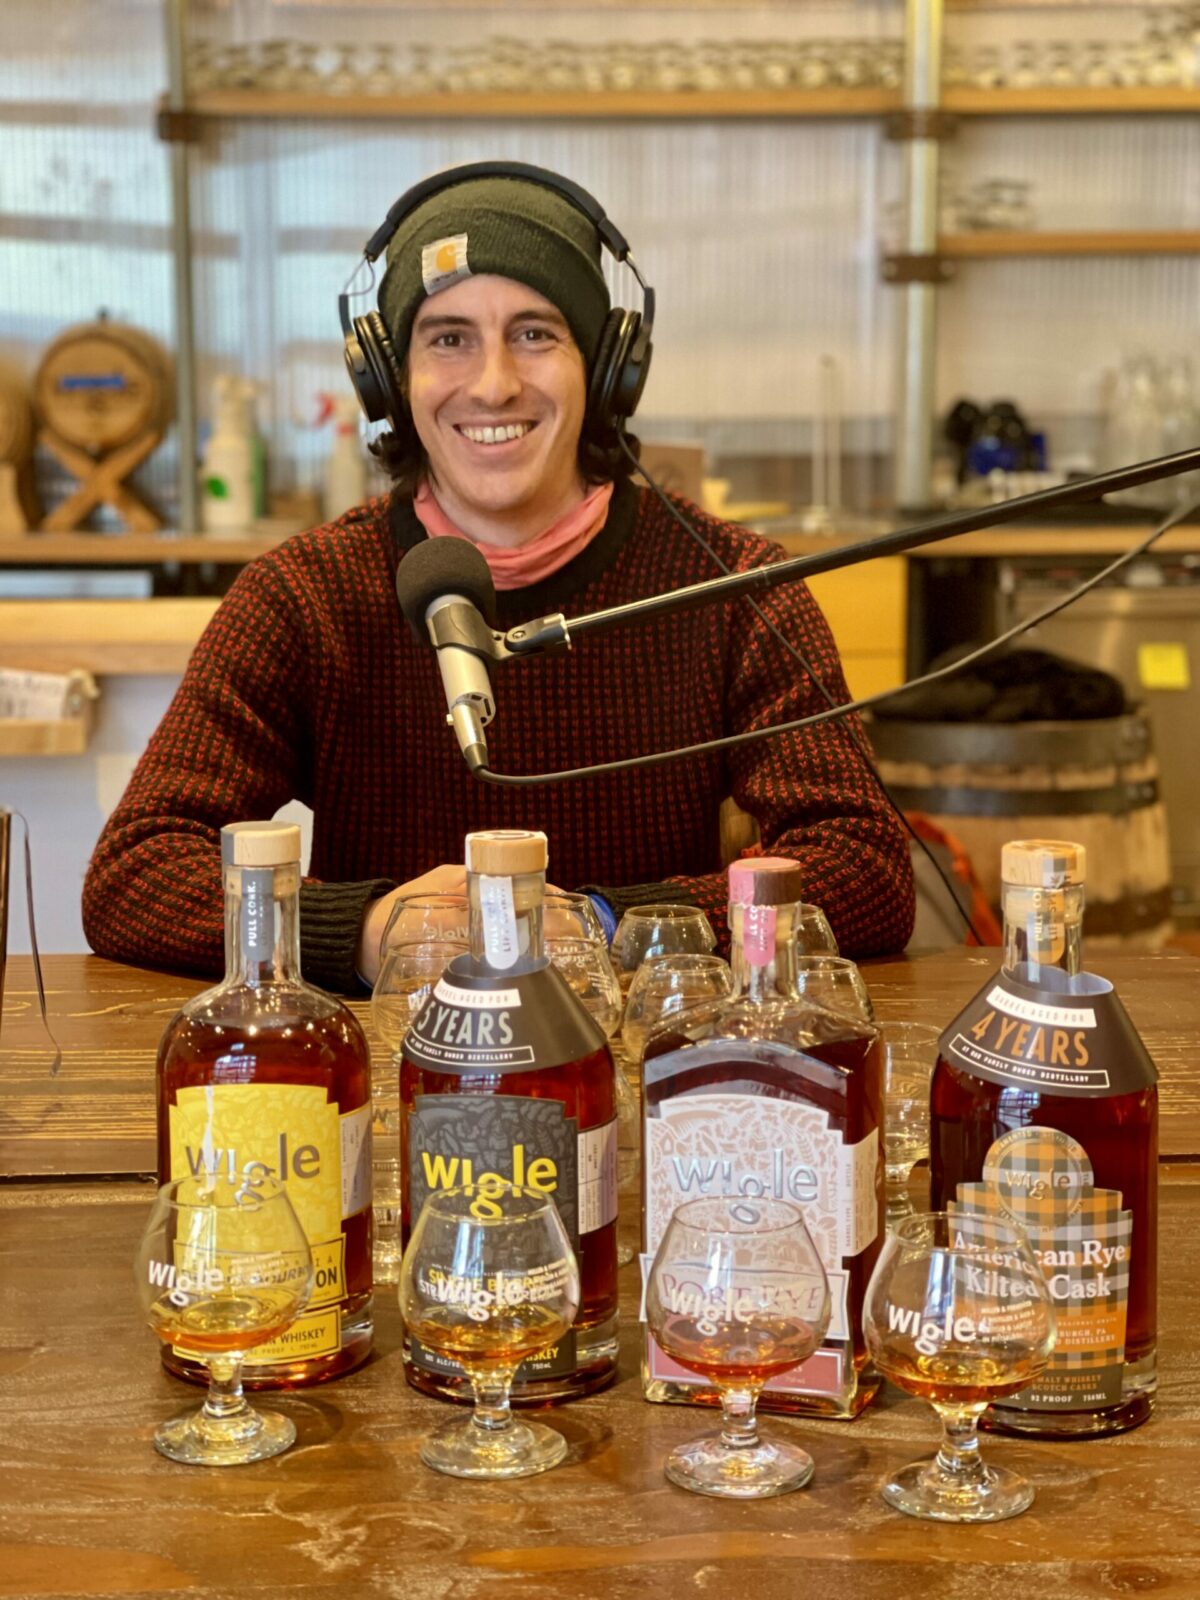 Visit to Pittsburgh's Wigle Whiskey